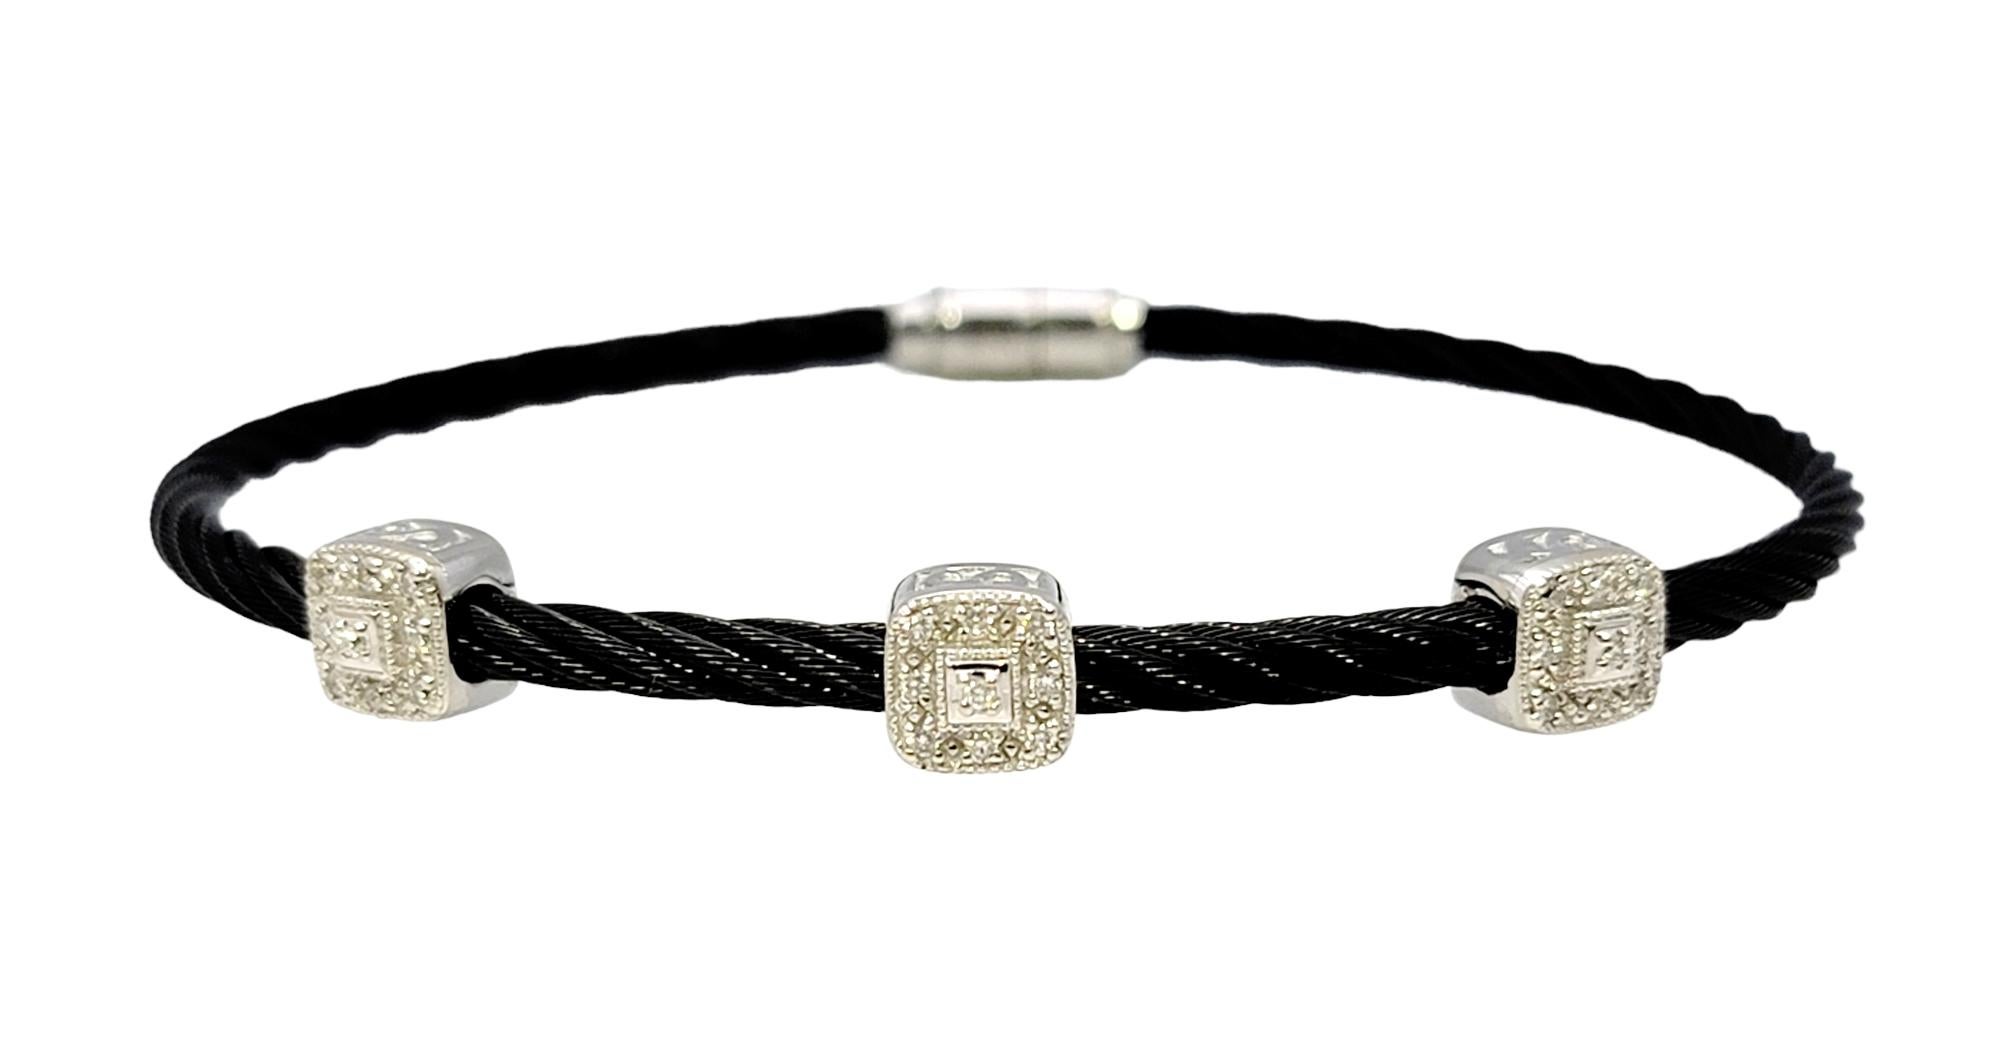 Simple yet elegant Charriol diamond station bracelet with a sturdy flexible black stainless steel cable cord. Three white gold square stations are adorned with sparkly white diamonds, offering a nice contrast to the dark cable bracelet. Would look